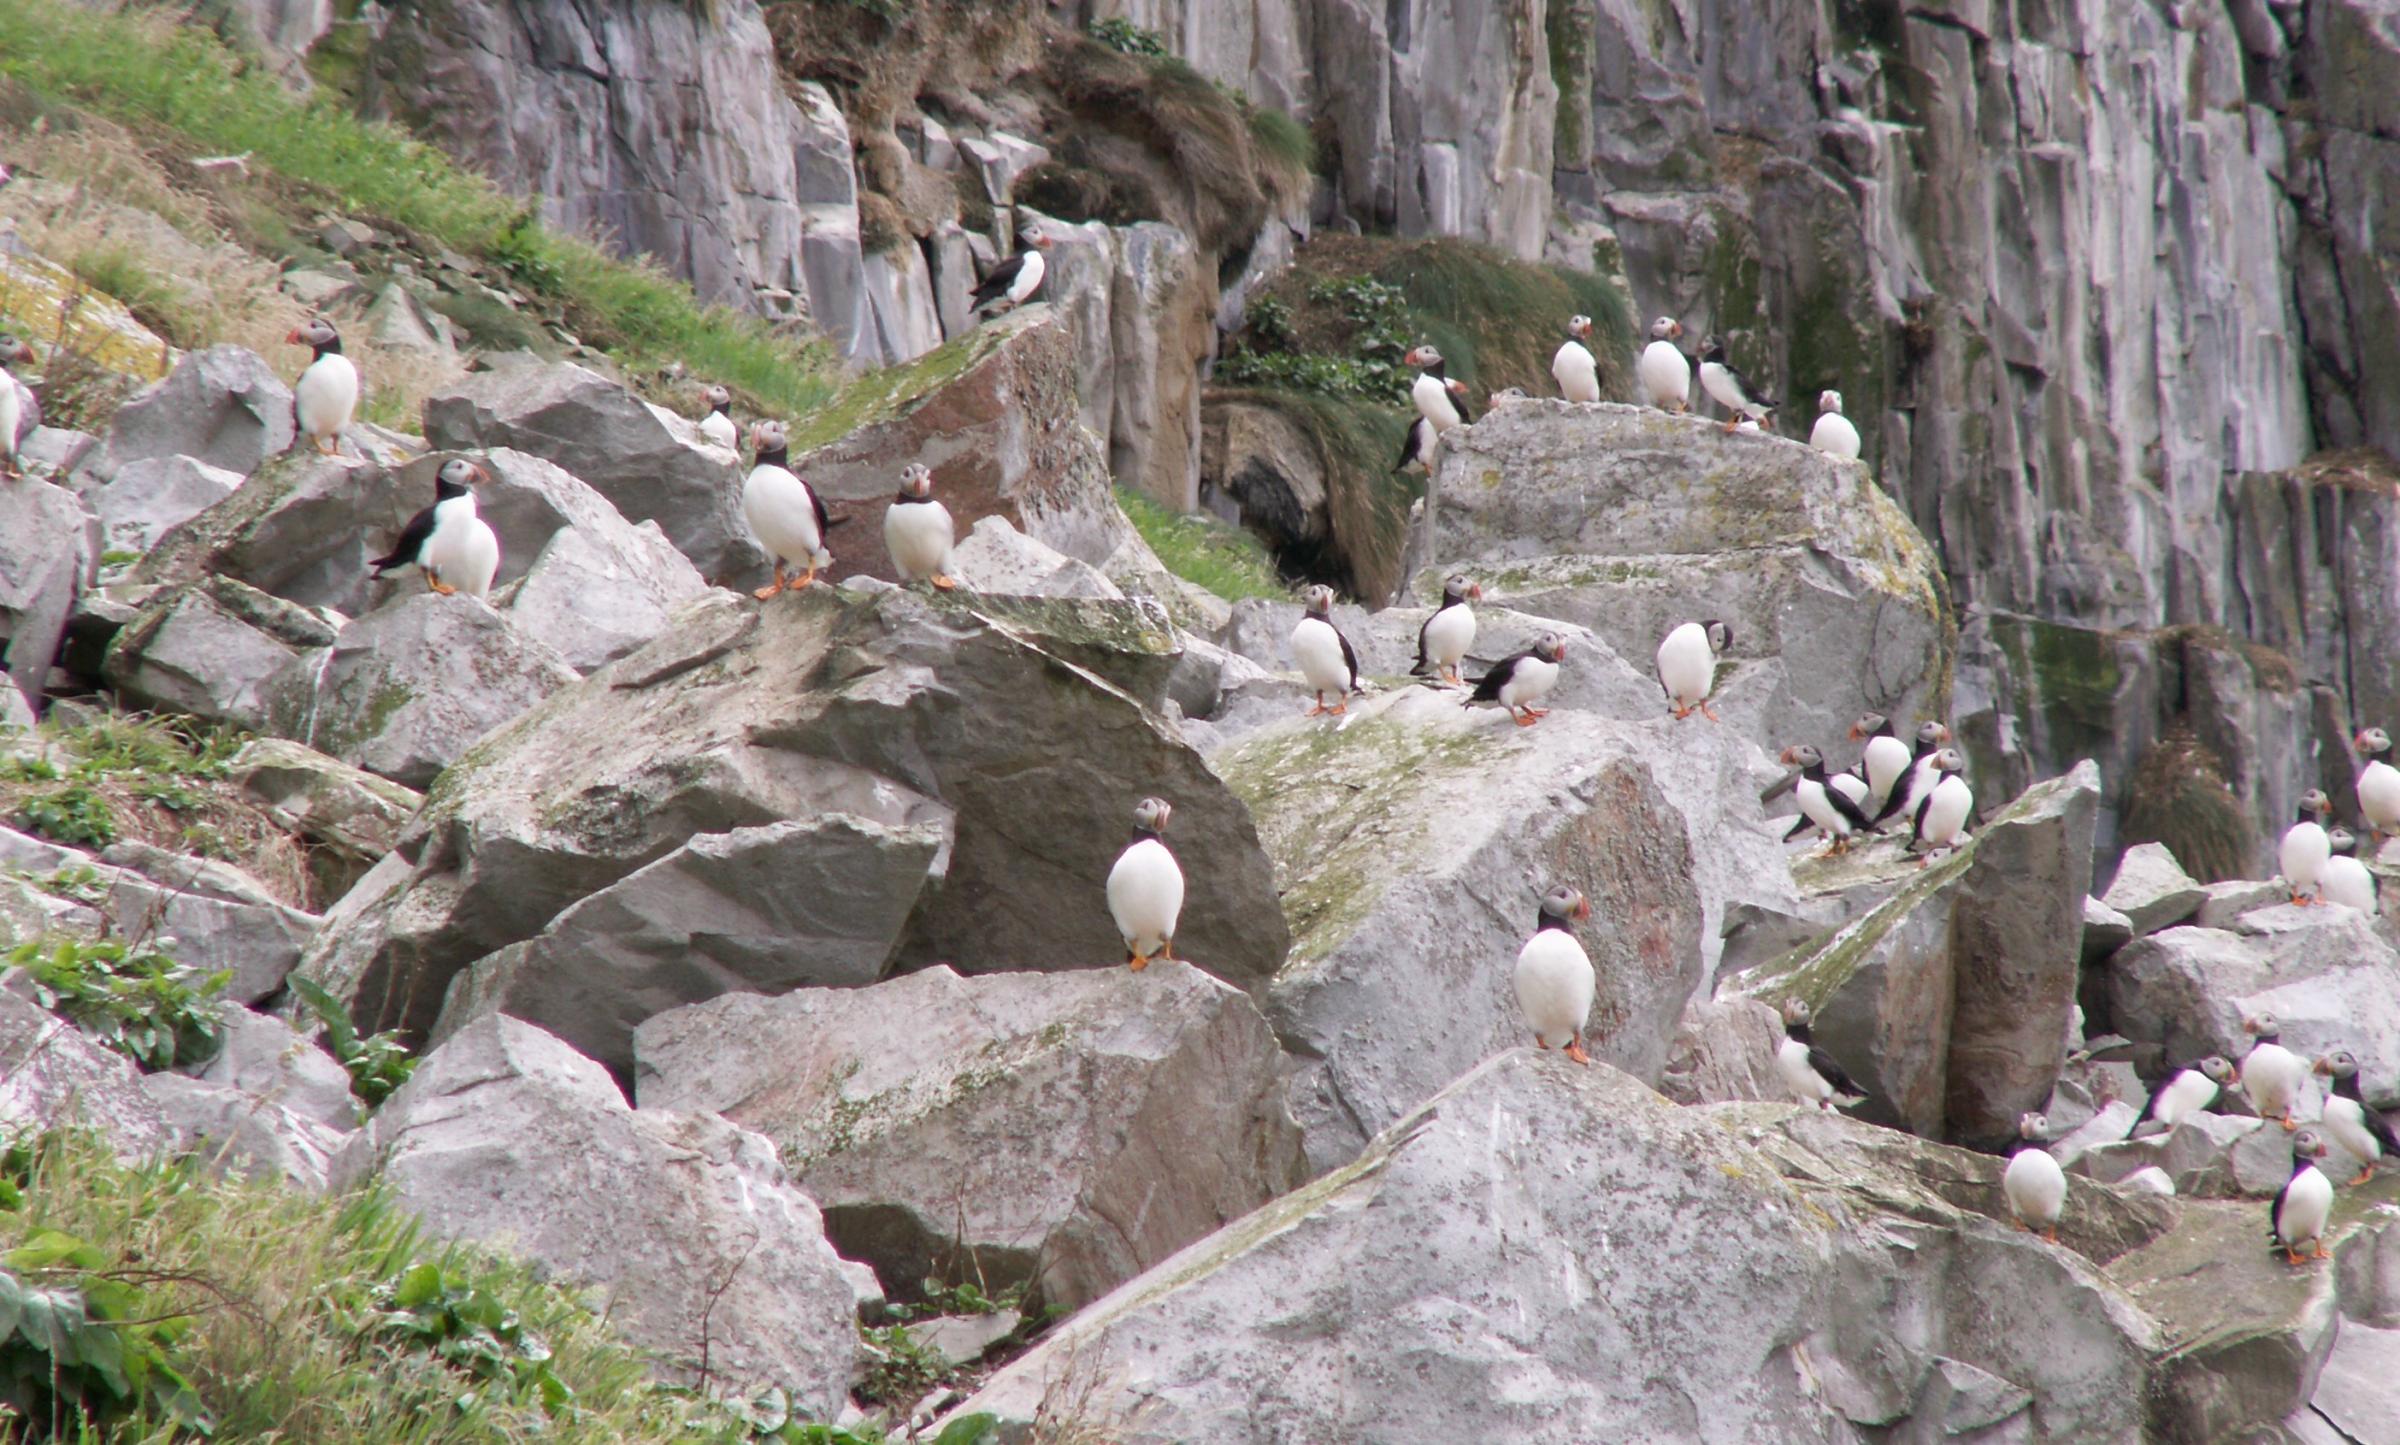 Puffins are once again thriving on Ailsa Craig. Picture: Bernard Zonfrillo